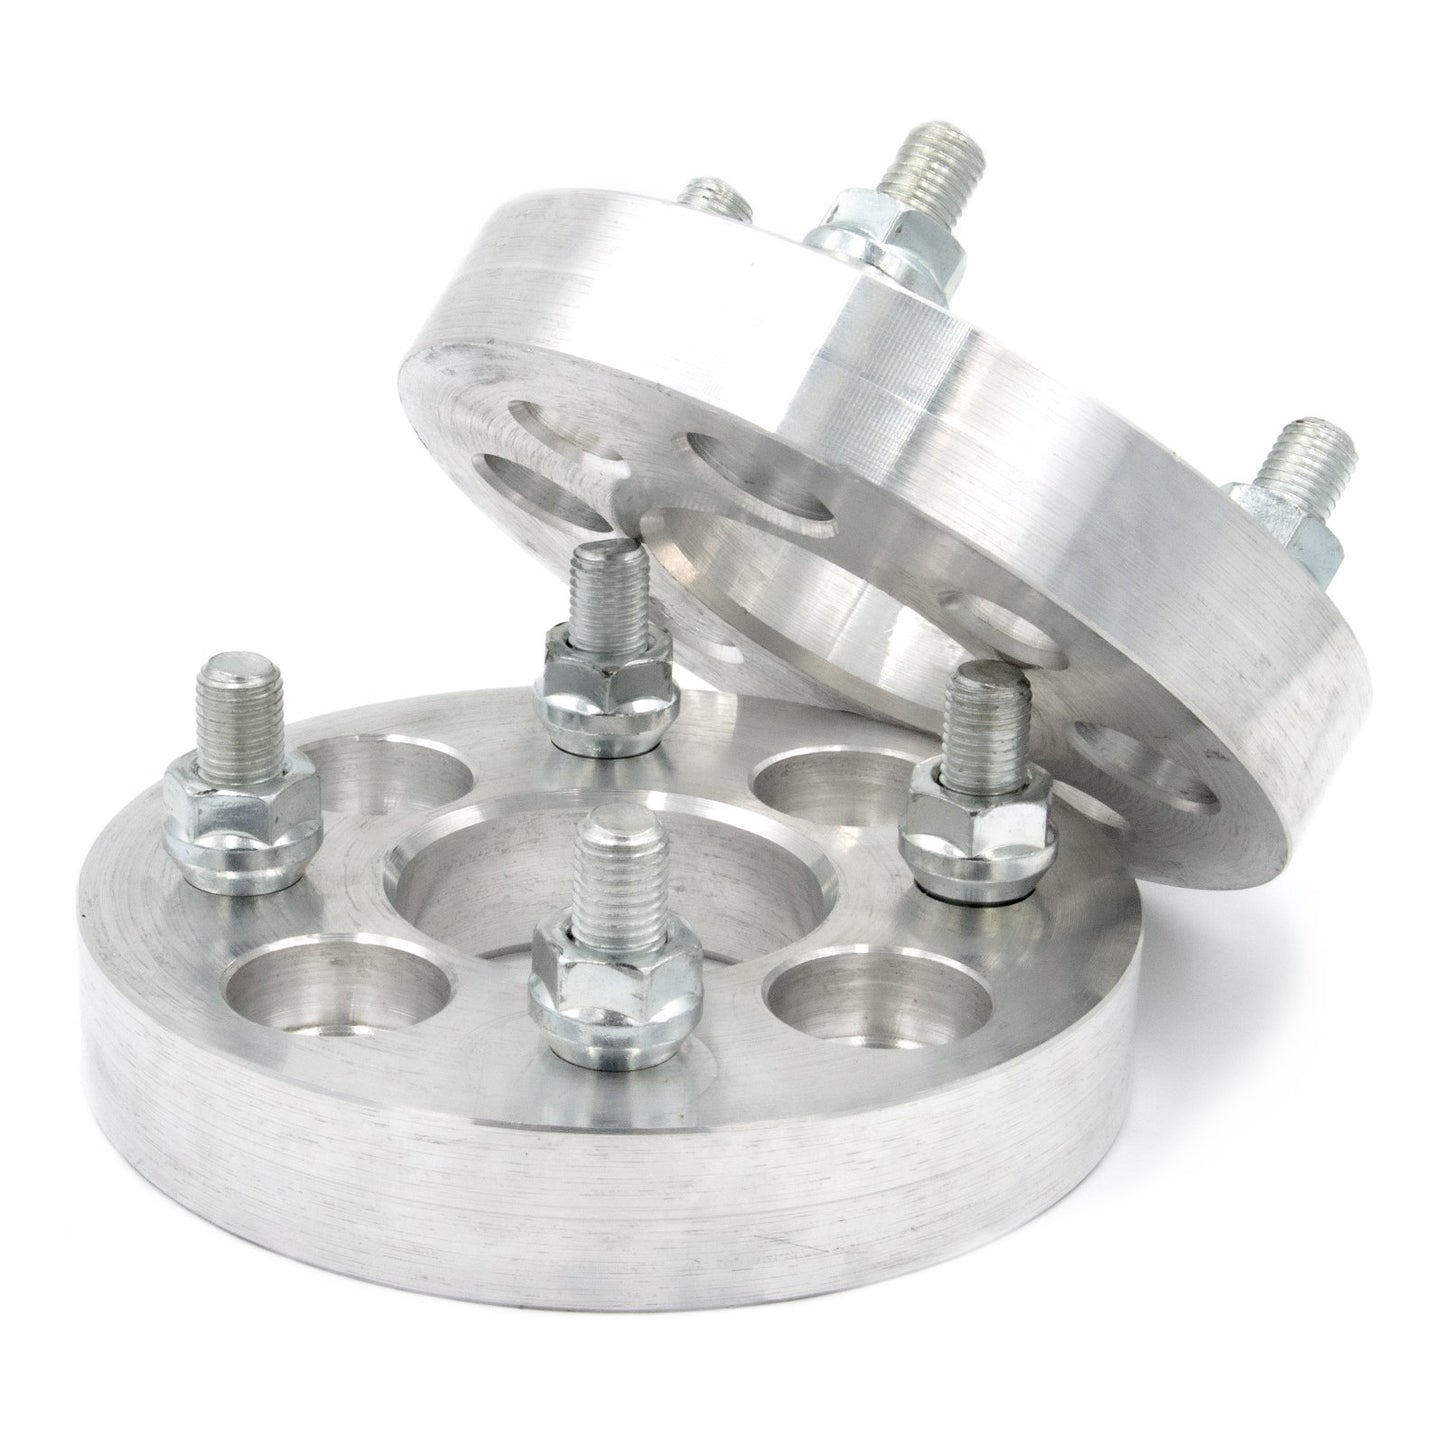 4x137 to 4x110 Wheel Spacer/Adapter - Thickness: 3/4"- 4"